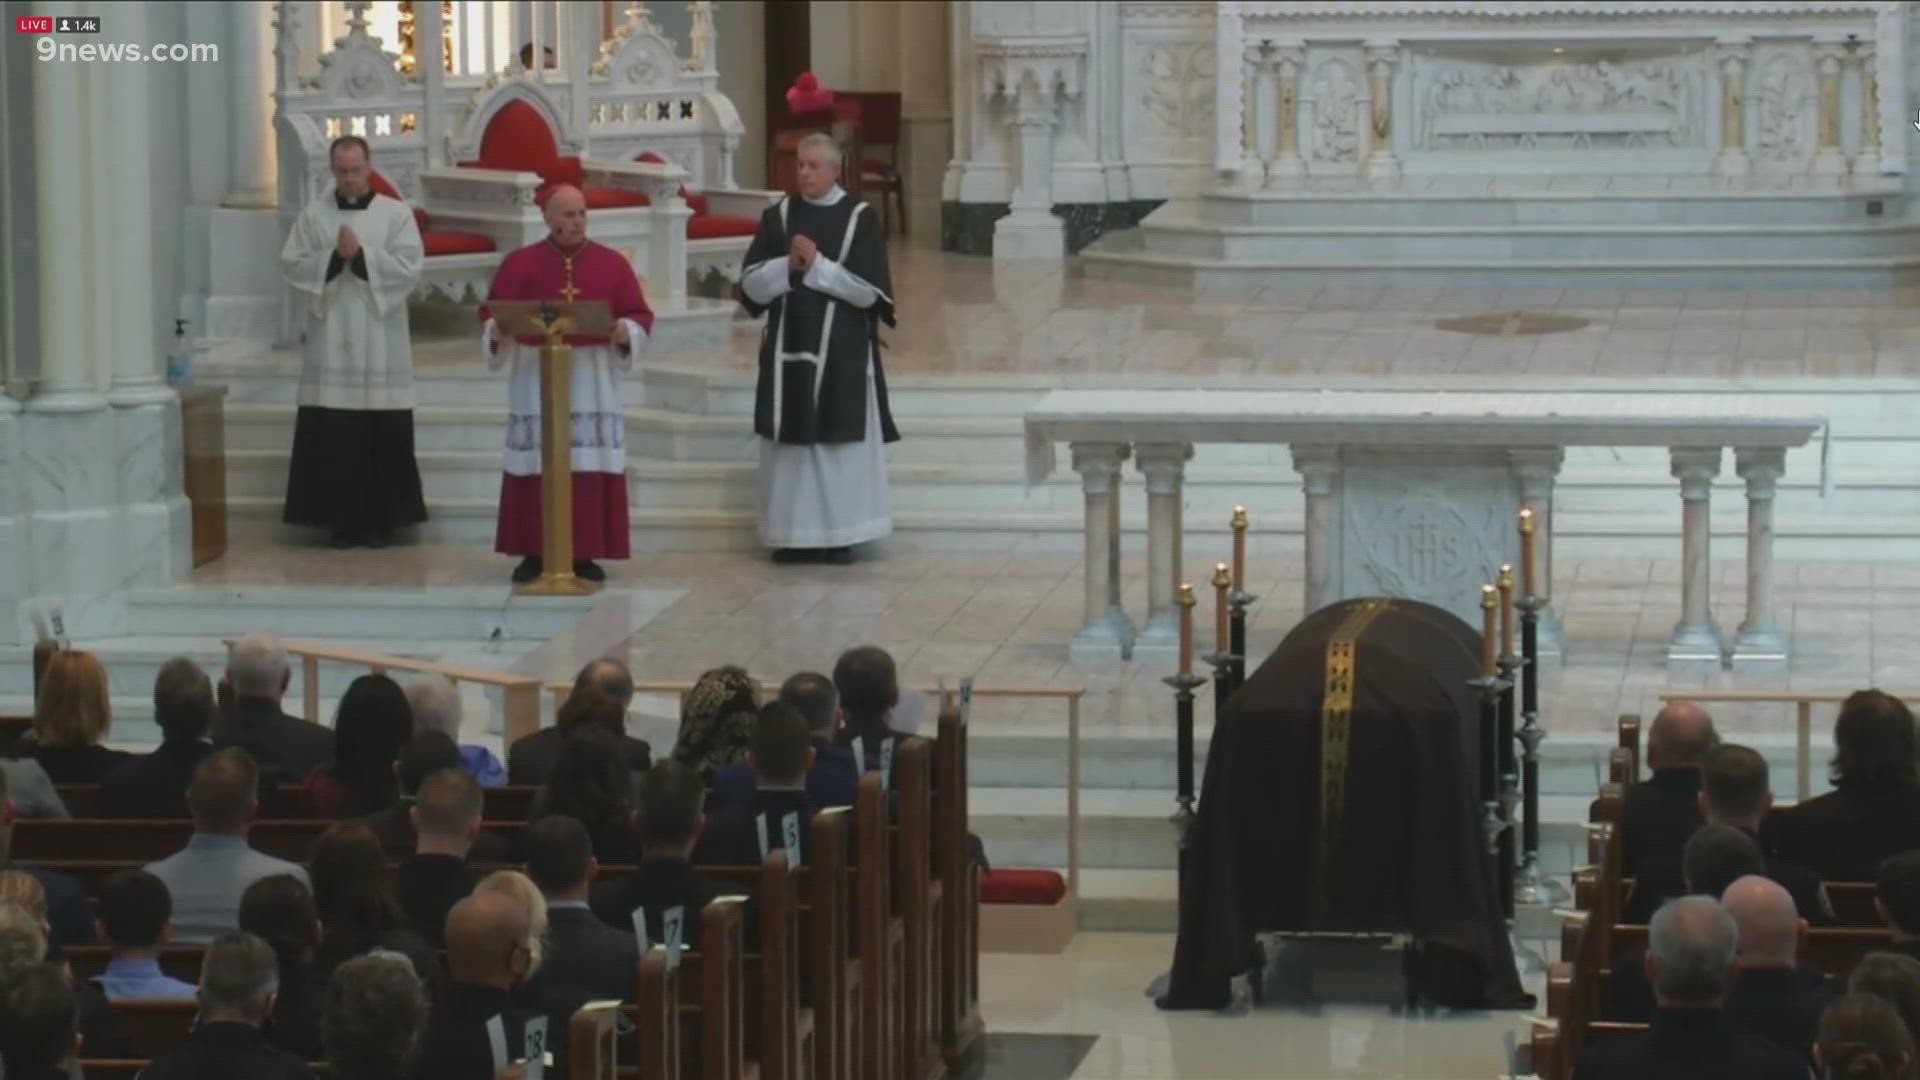 Archdiocese of Denver held a Catholic funeral Mass on Monday. Officer Talley's public funeral will be held Tuesday.